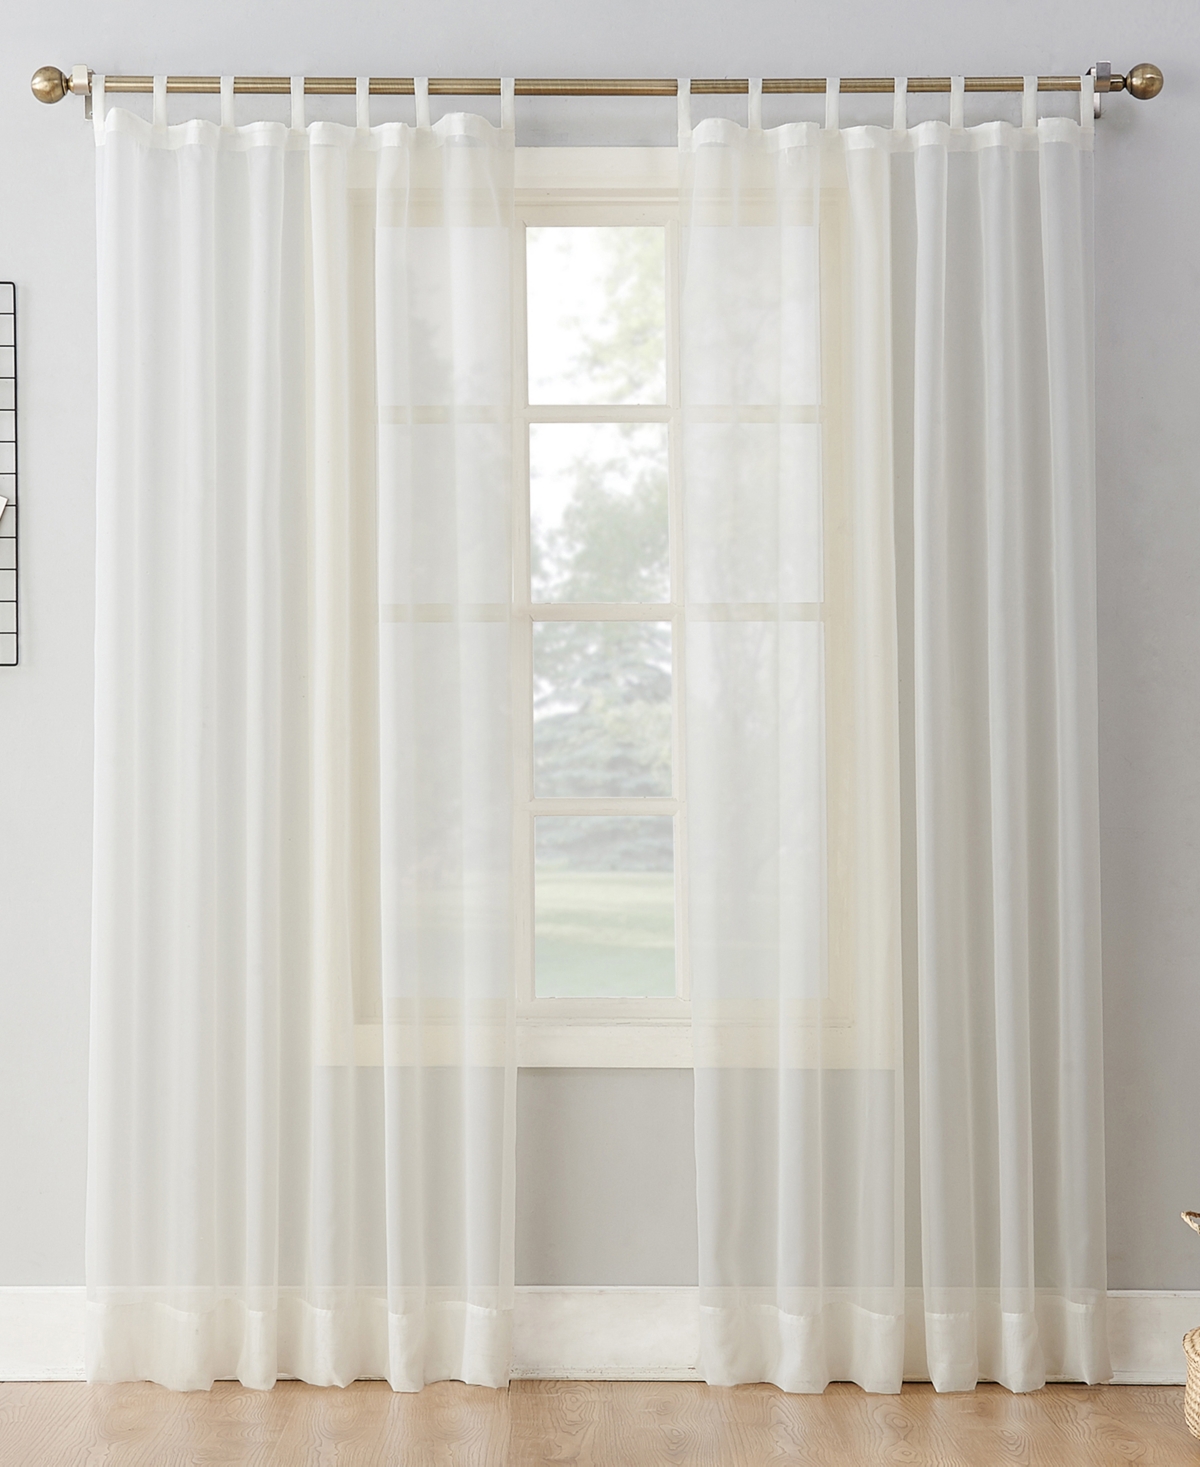 No. 918 Sheer Voile 59" X 63" Tab Top Curtain Panel In Eggshell